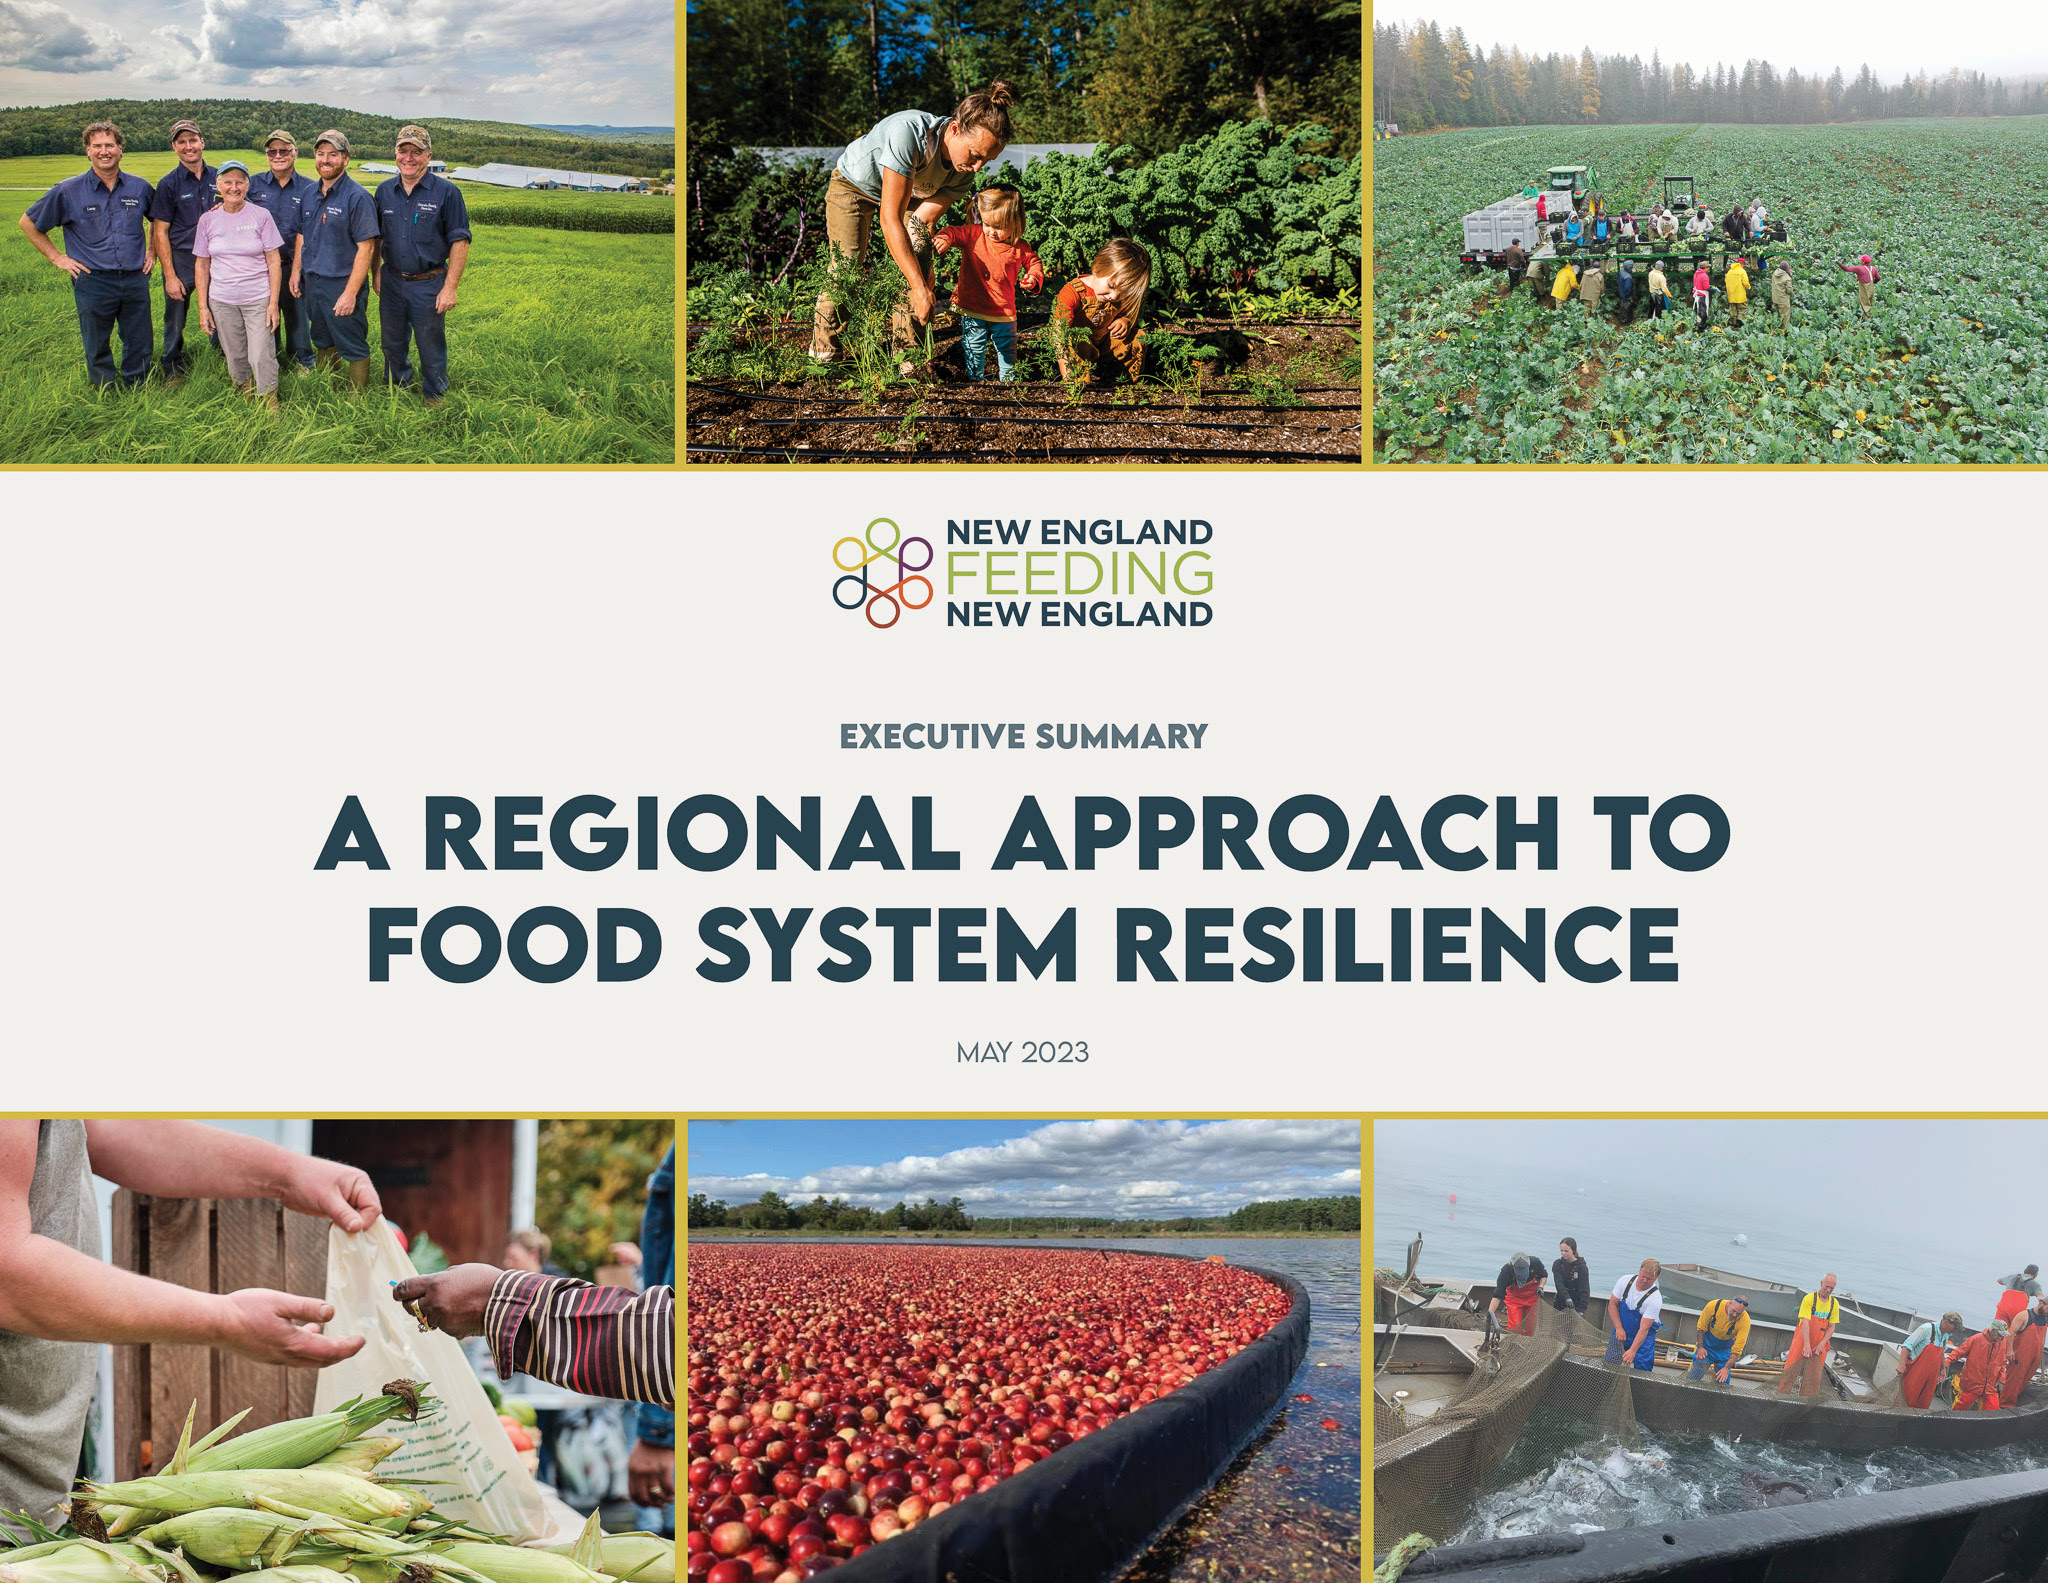 NEFNE - A Regional Approach to Food System Resilience Report